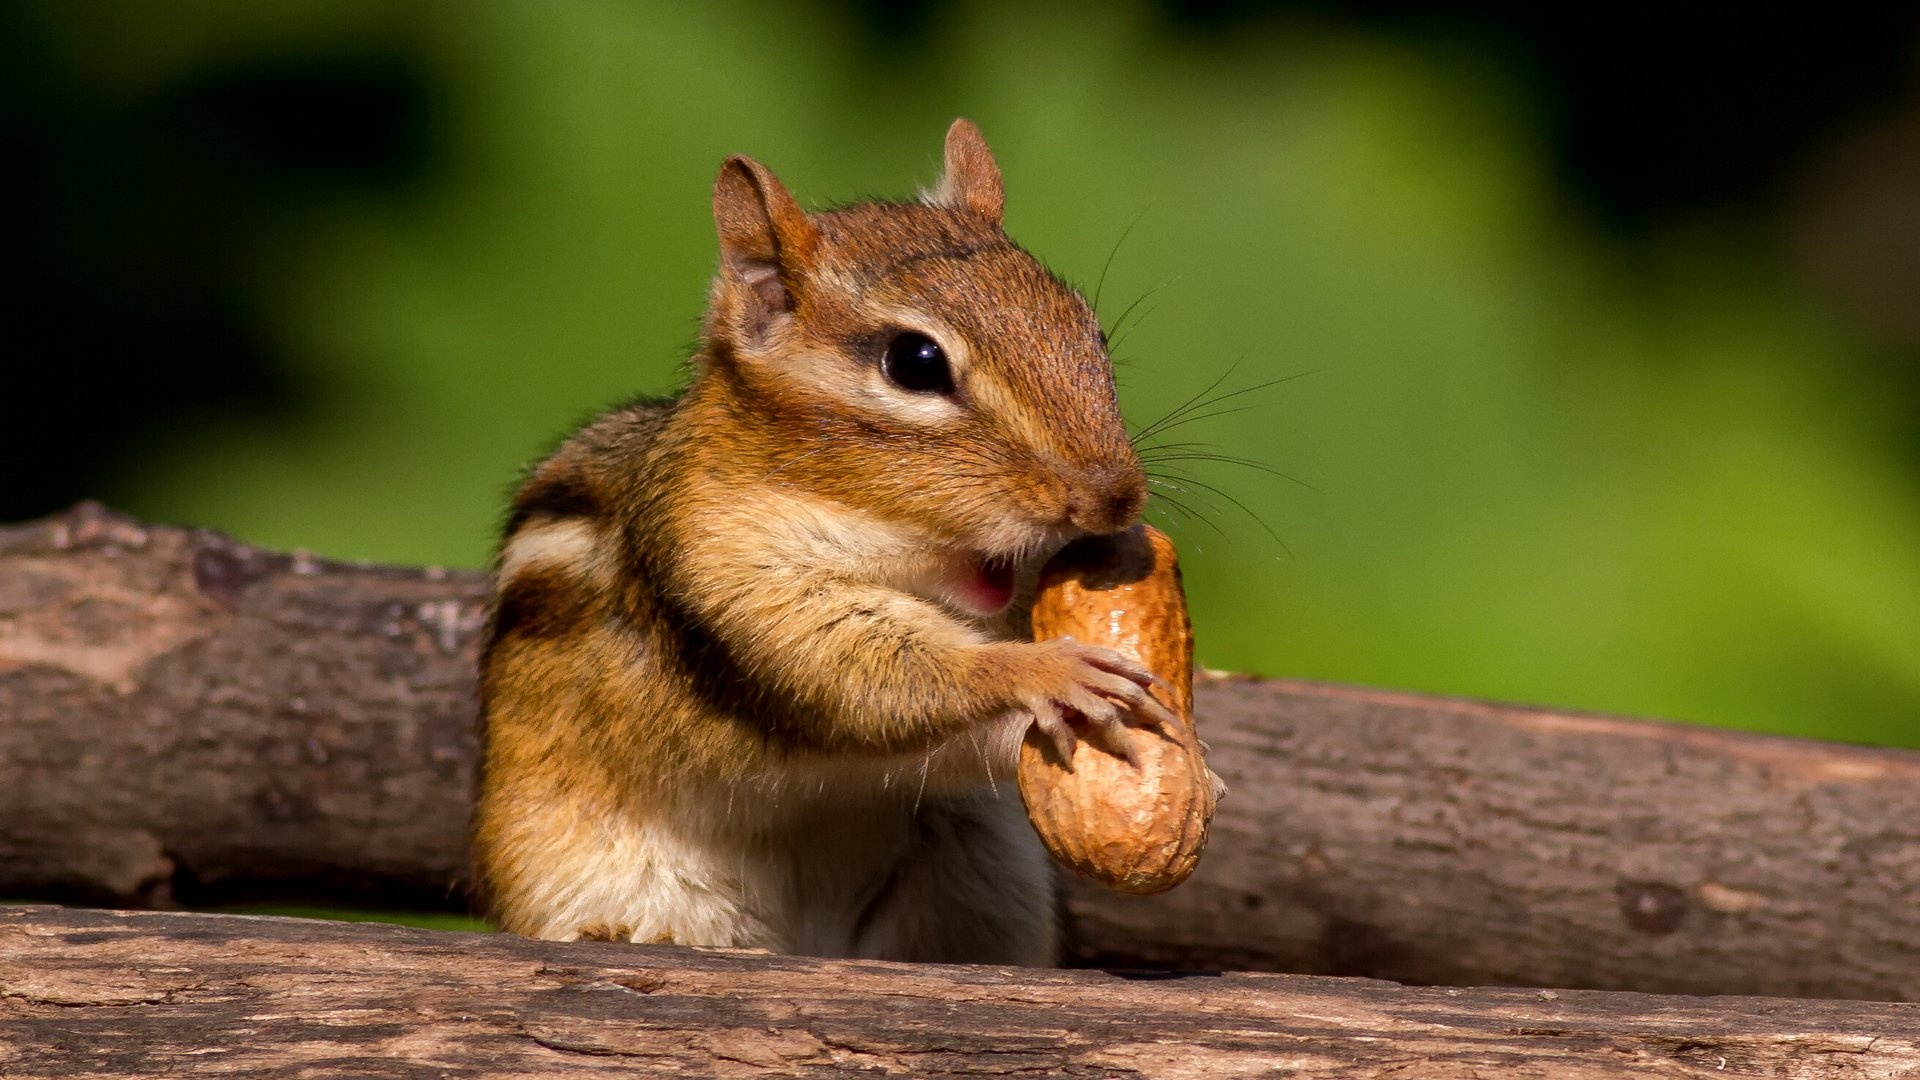 Chipmunk: Have an omnivorous diet primarily consisting of seeds, nuts, fruits, and buds. 1920x1080 Full HD Background.